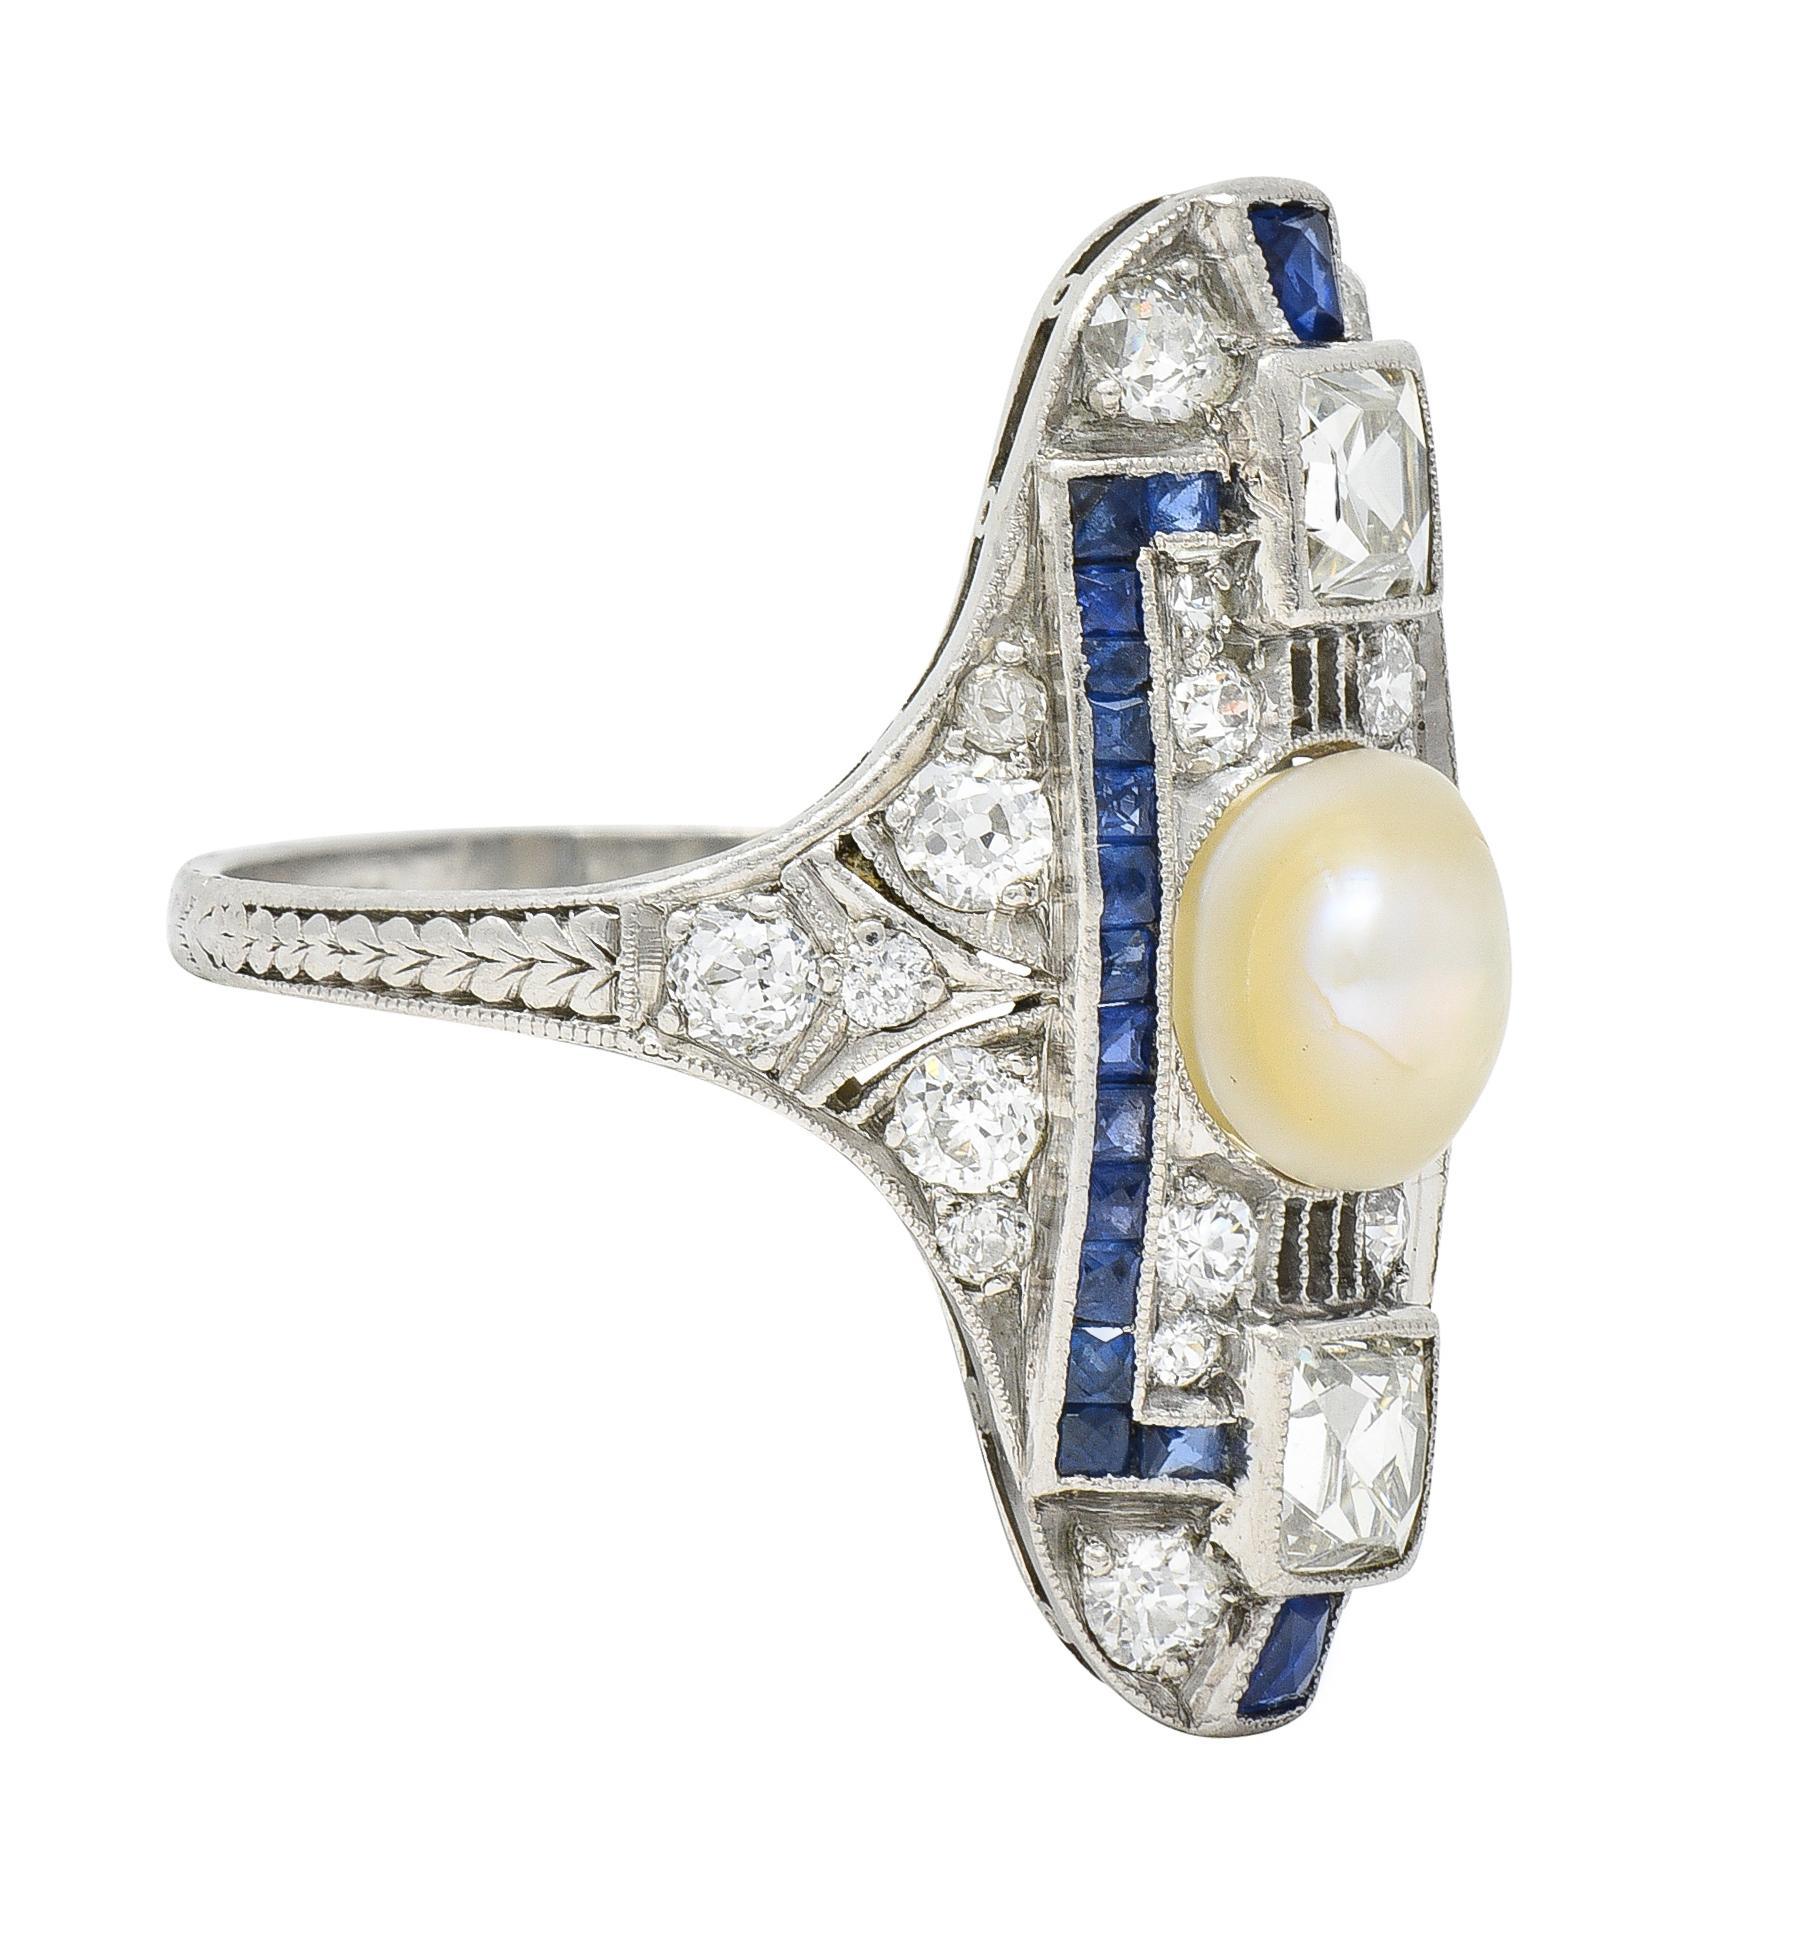 Centering a 6.9 mm near-round natural button pearl - cream in body color with strong iridescence
Flanked north and south by French cut diamonds weighing approximately 0.92 carat total
H color with VS2 clarity - bezel set with a pierced streamline